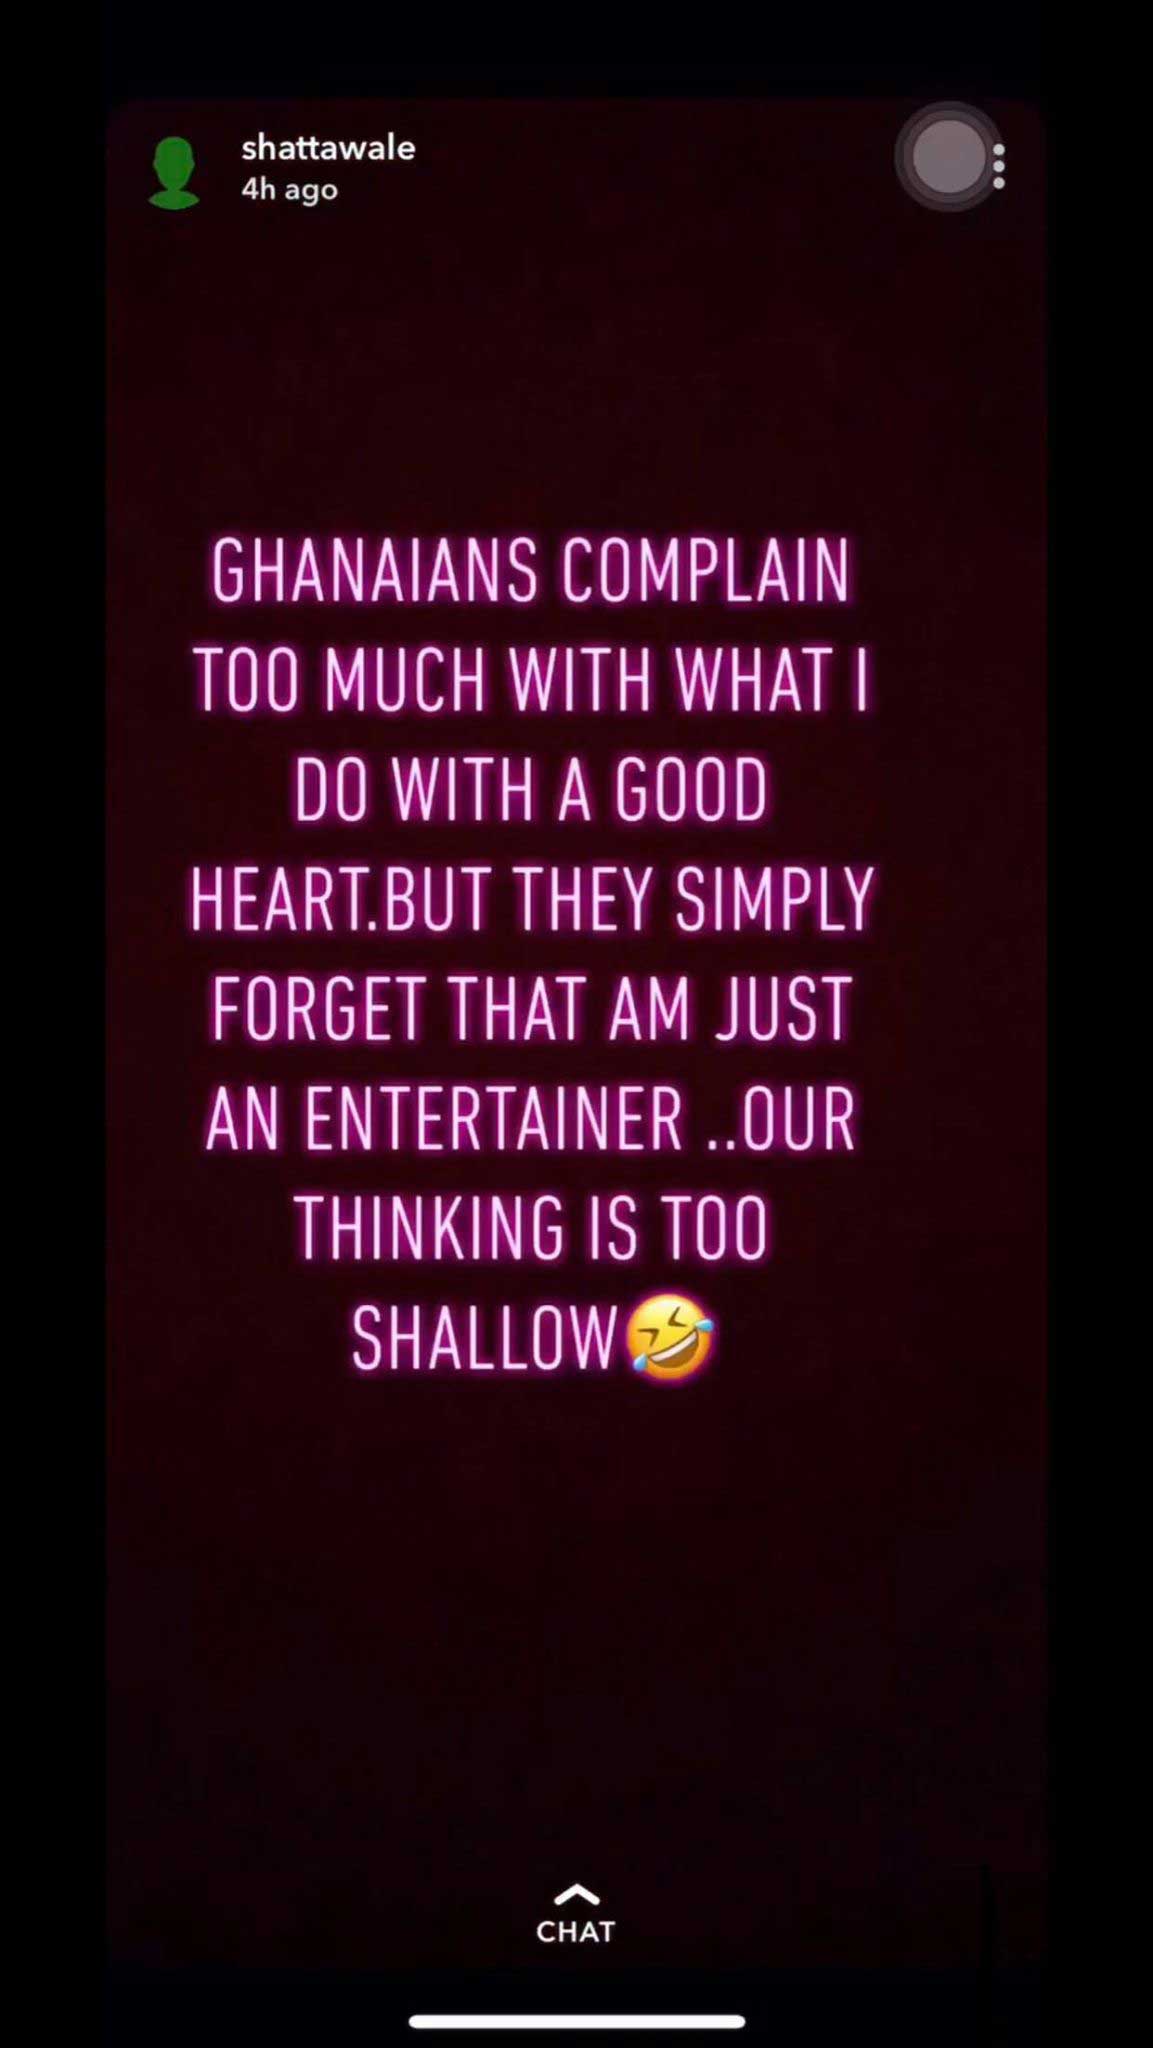 Ghanaians complain too much about what I do with good heart-Shatta Wale